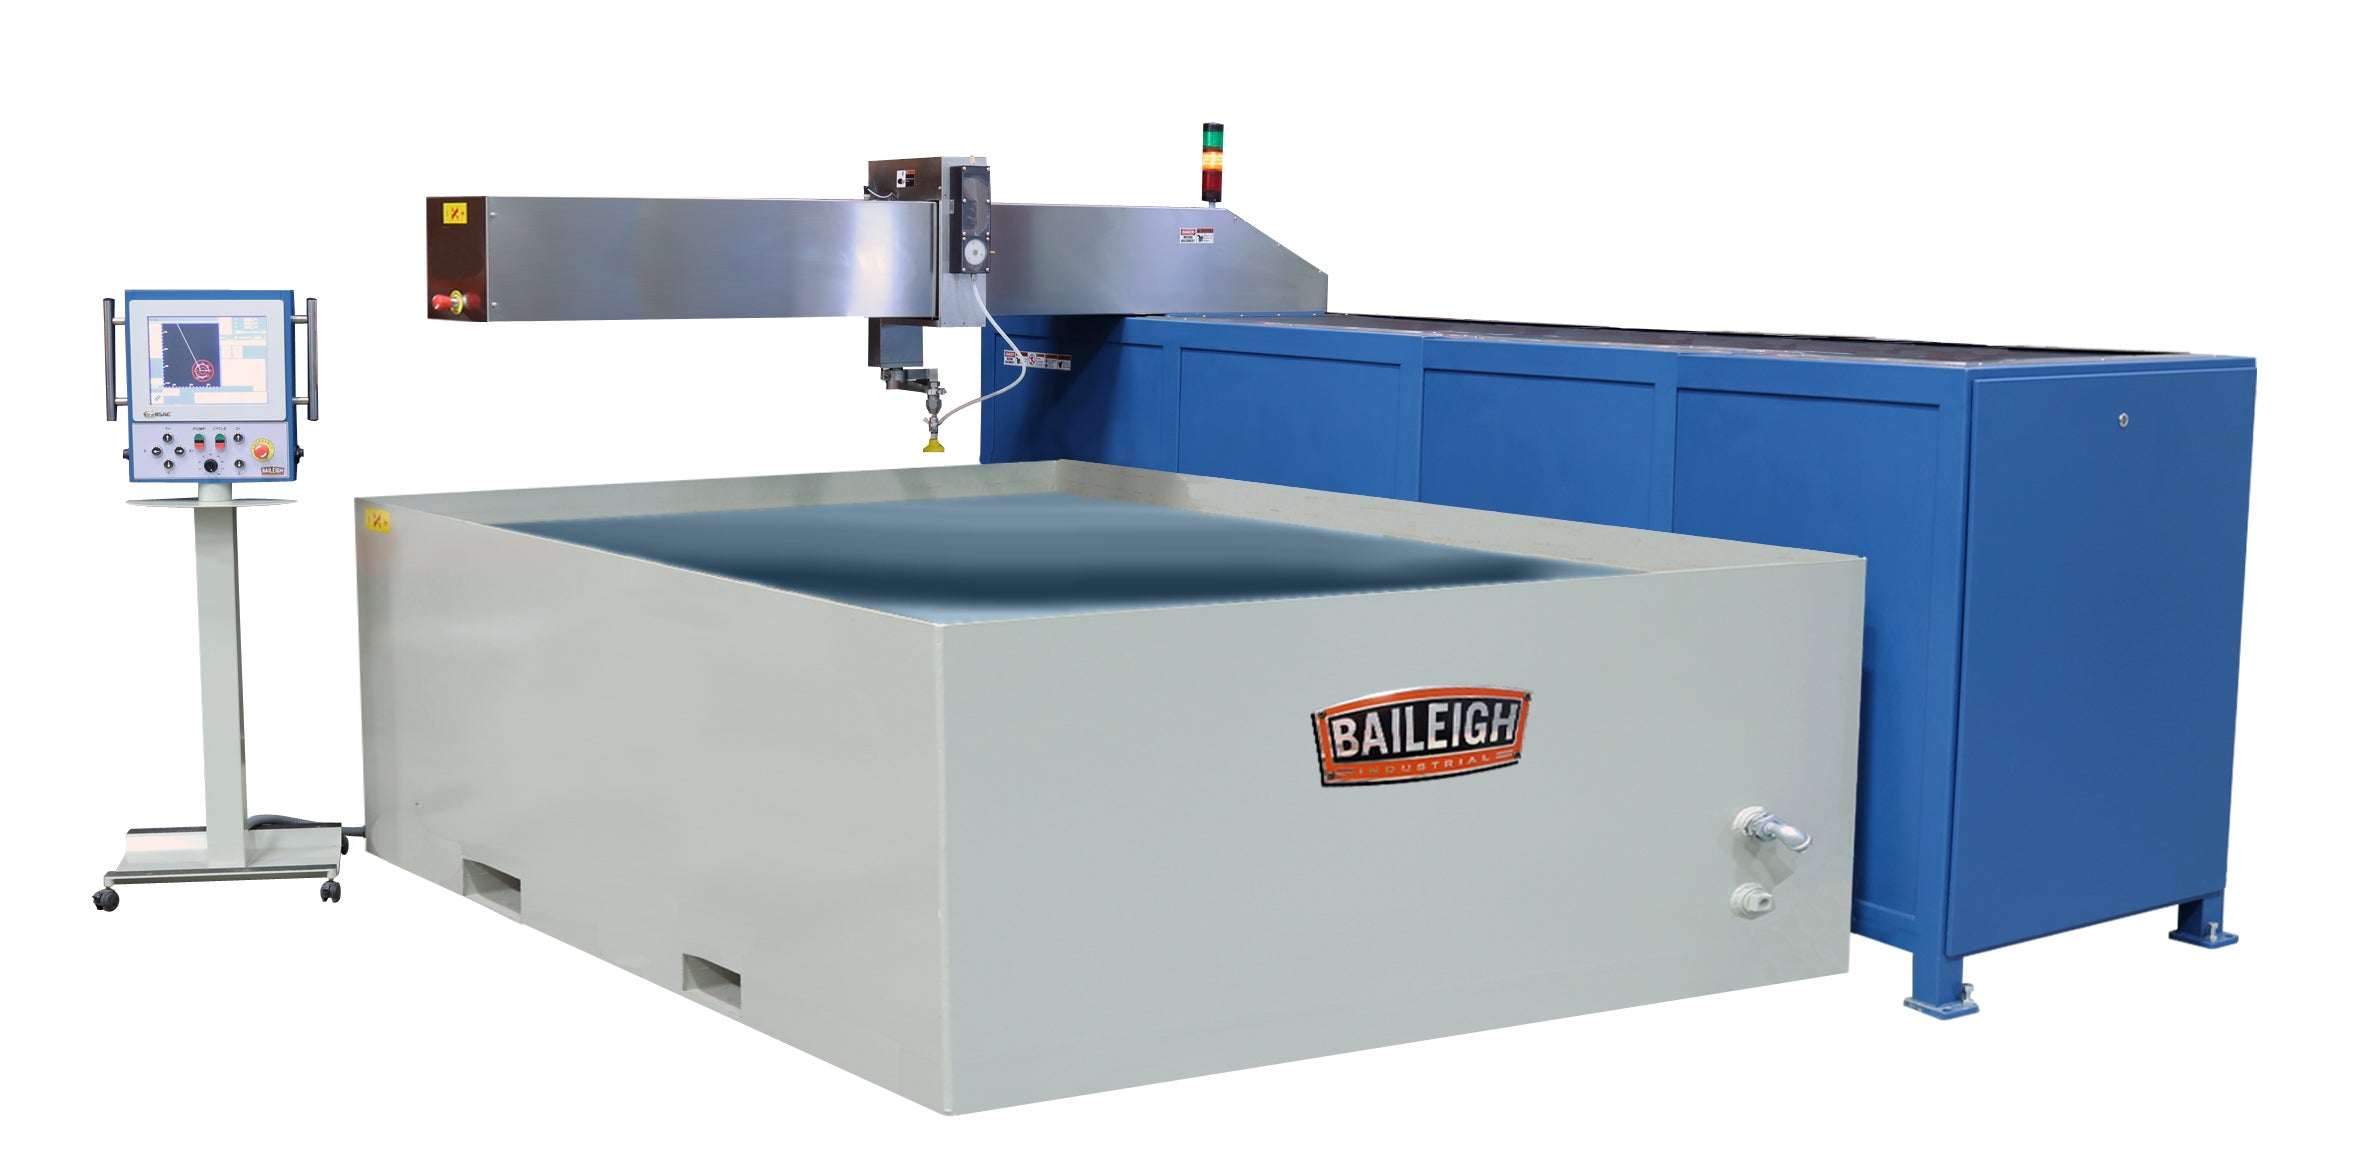 Baileigh WJ-85CNC 480V 3 Phase 60 Htz 60" x 98" 3 axis CNC Flying Arm Water Jet with Direct Drive Pump